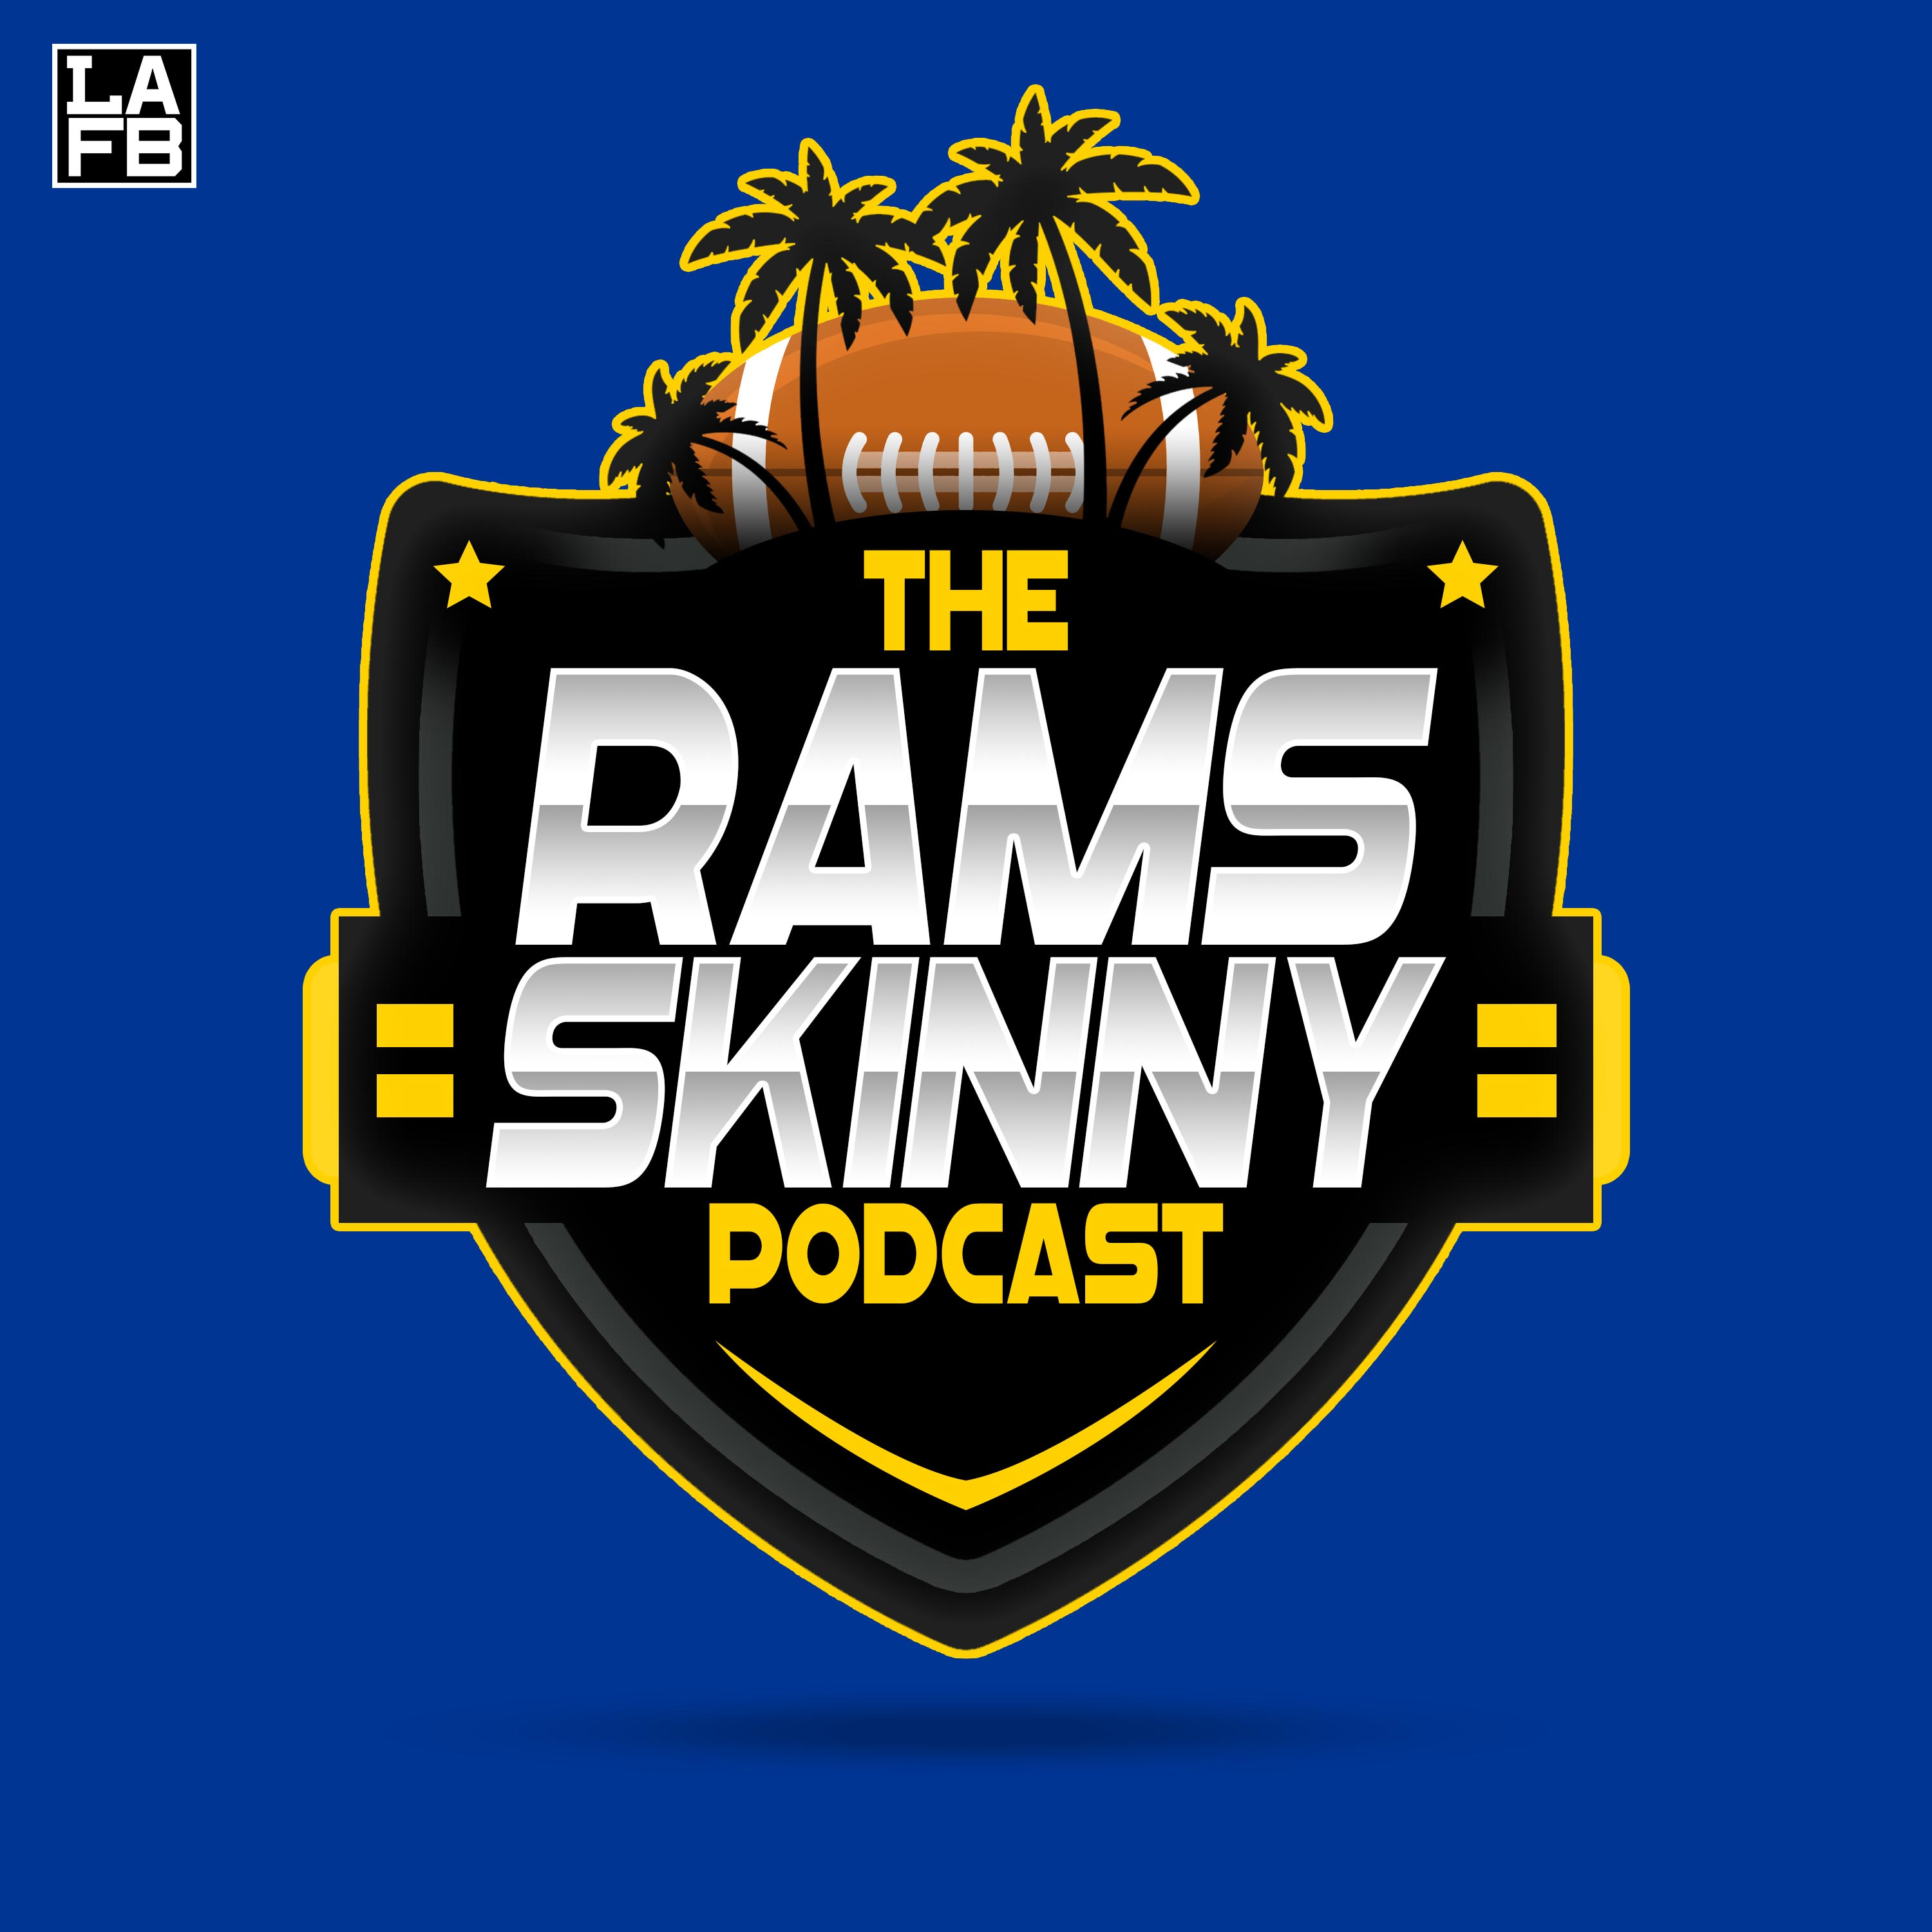 Los Angeles Rams Jared Verse Analysis | Day 2 Predictions And Best Fits